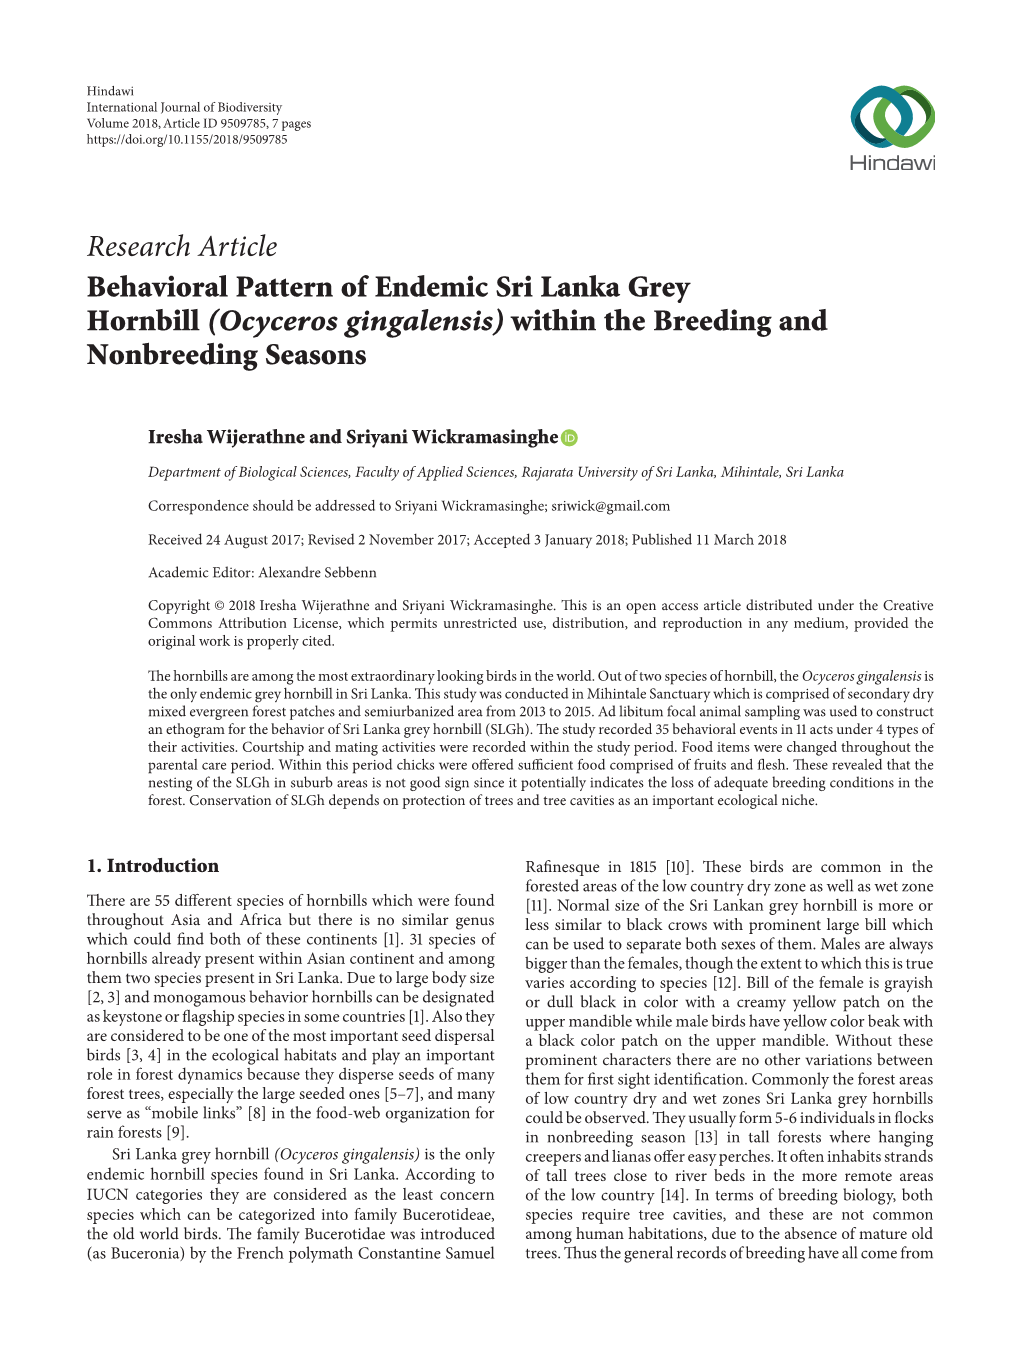 Research Article Behavioral Pattern of Endemic Sri Lanka Grey Hornbill (Ocyceros Gingalensis) Within the Breeding and Nonbreeding Seasons